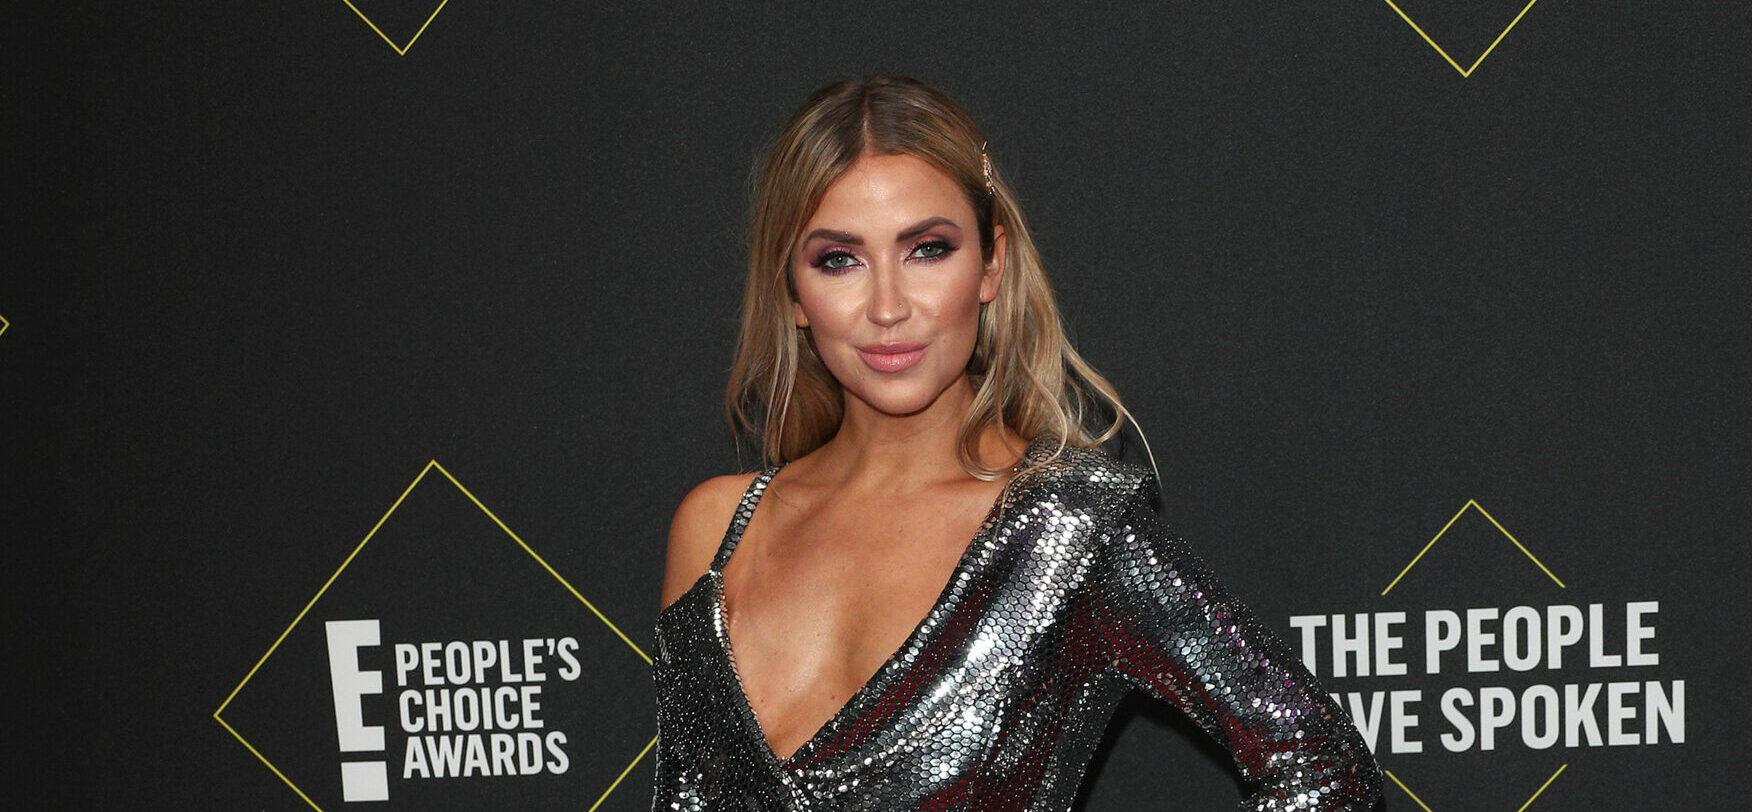 Kaitlyn Bristowe Shows Off Chest And Abs In Neon Cut-Out Bathing Suit